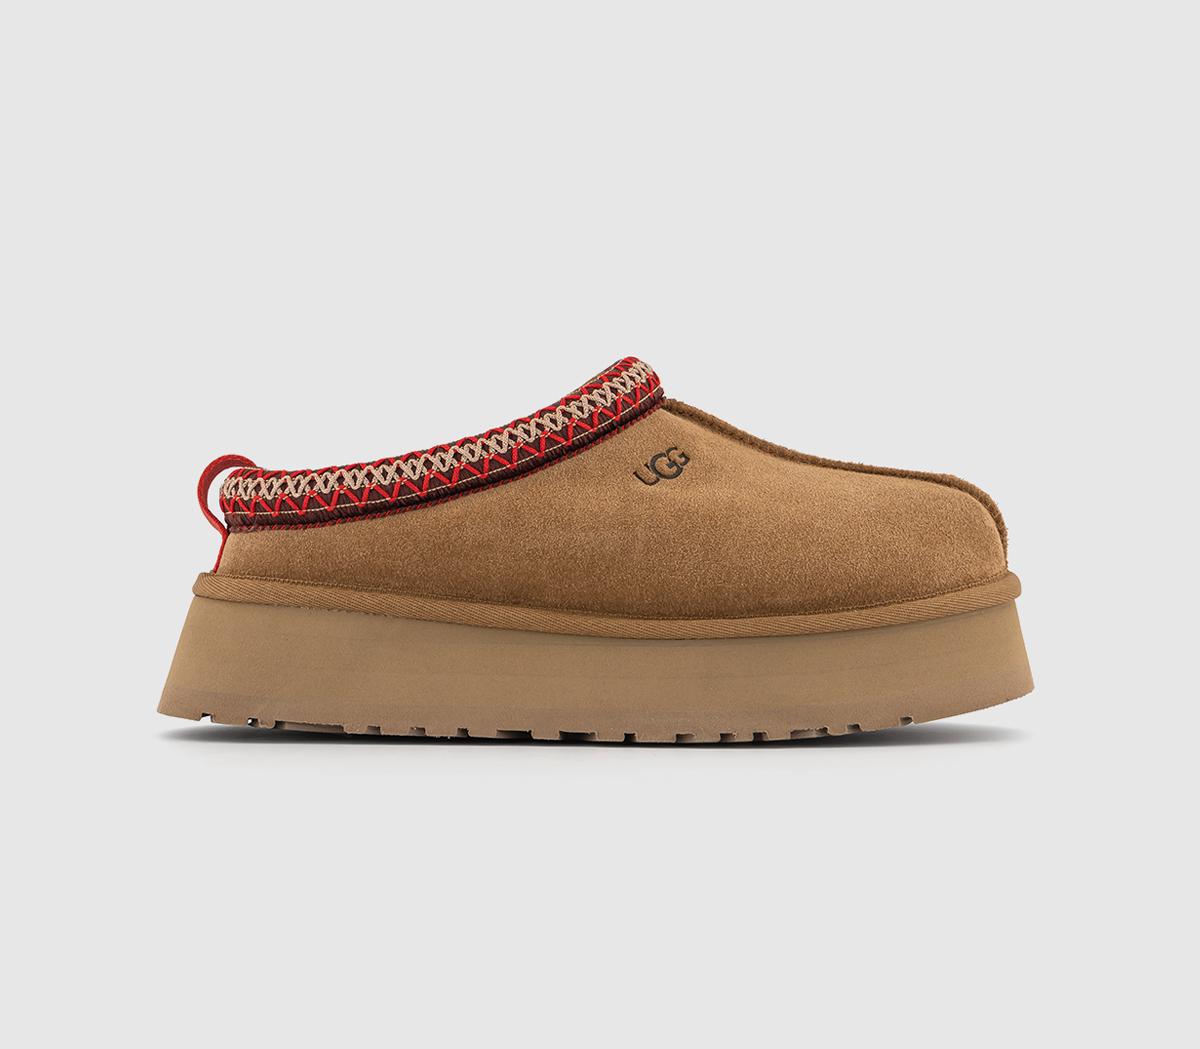 UGG Tazz Slippers Chestnut - Mother's Day Gift Guide